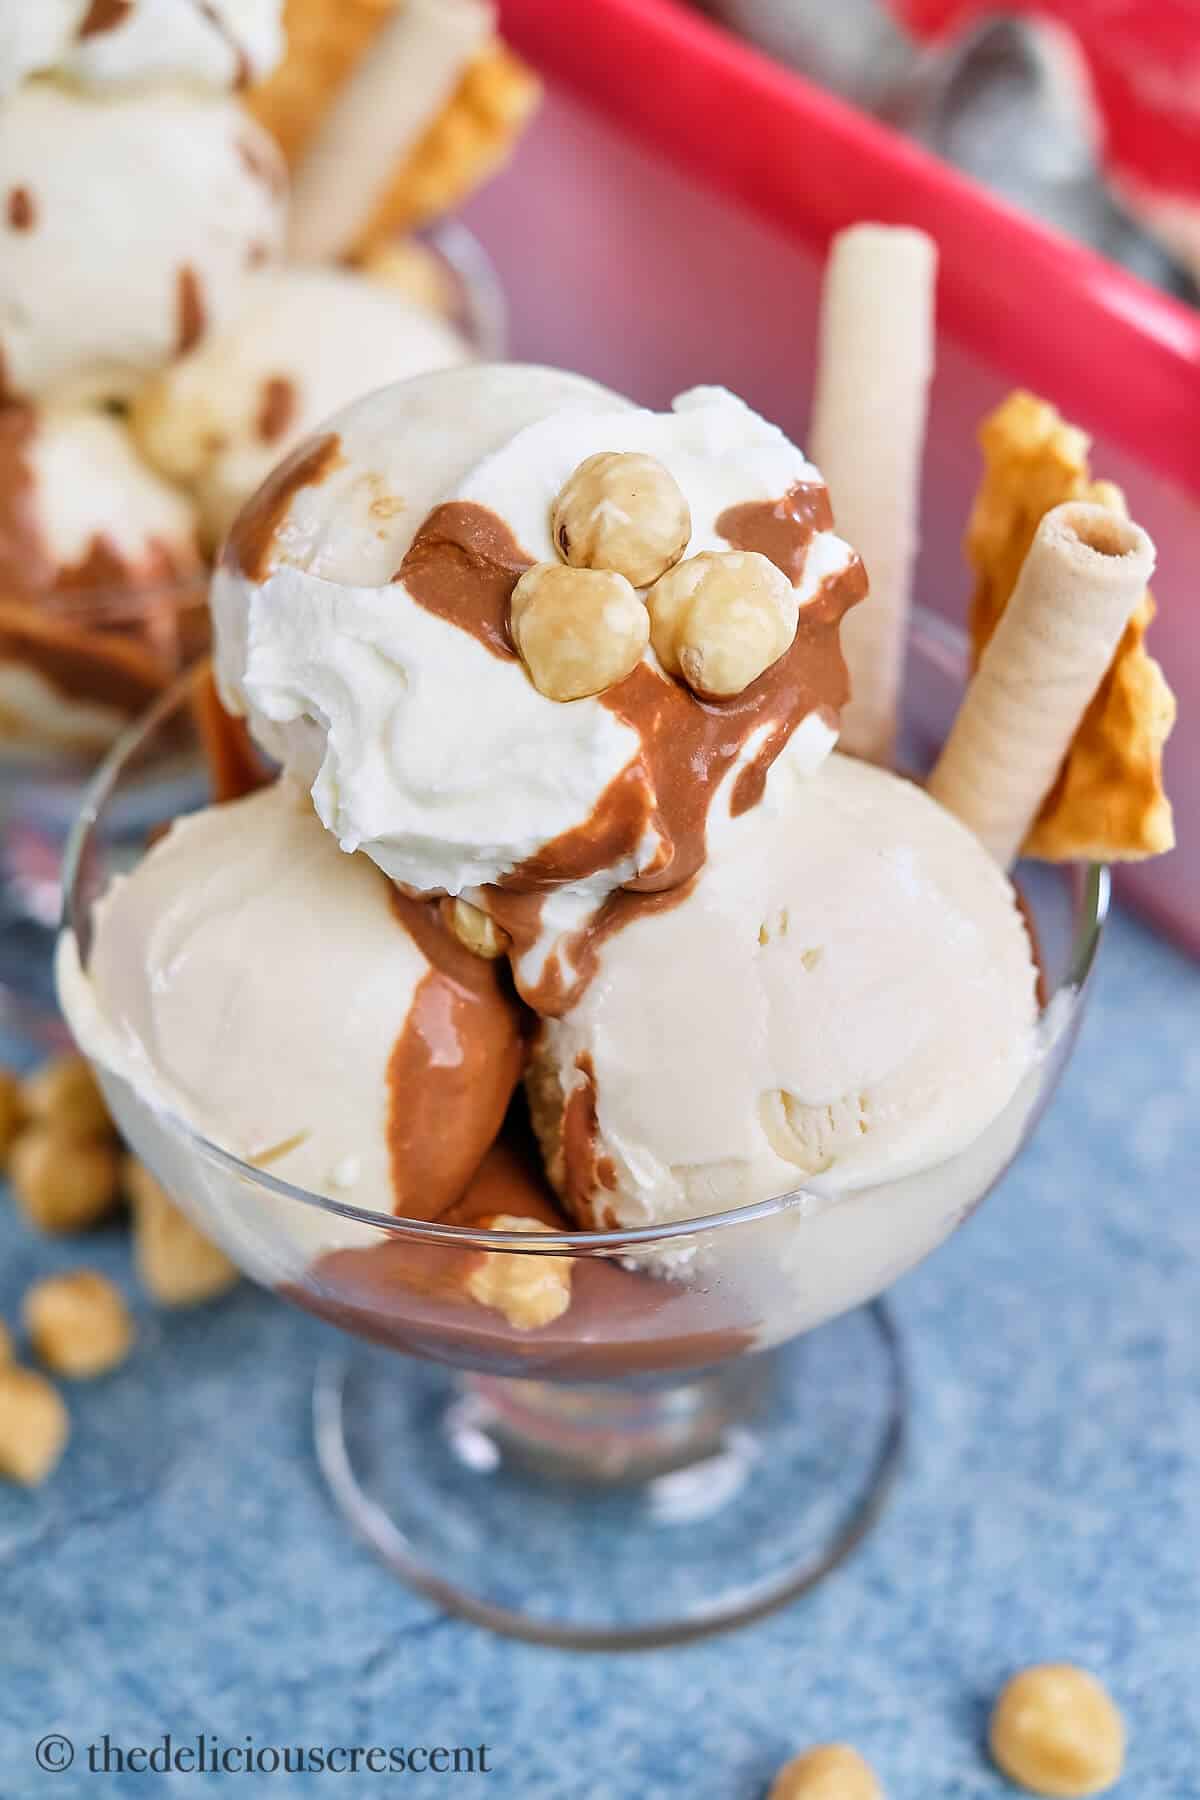 Hazelnut gelato served with toppings.